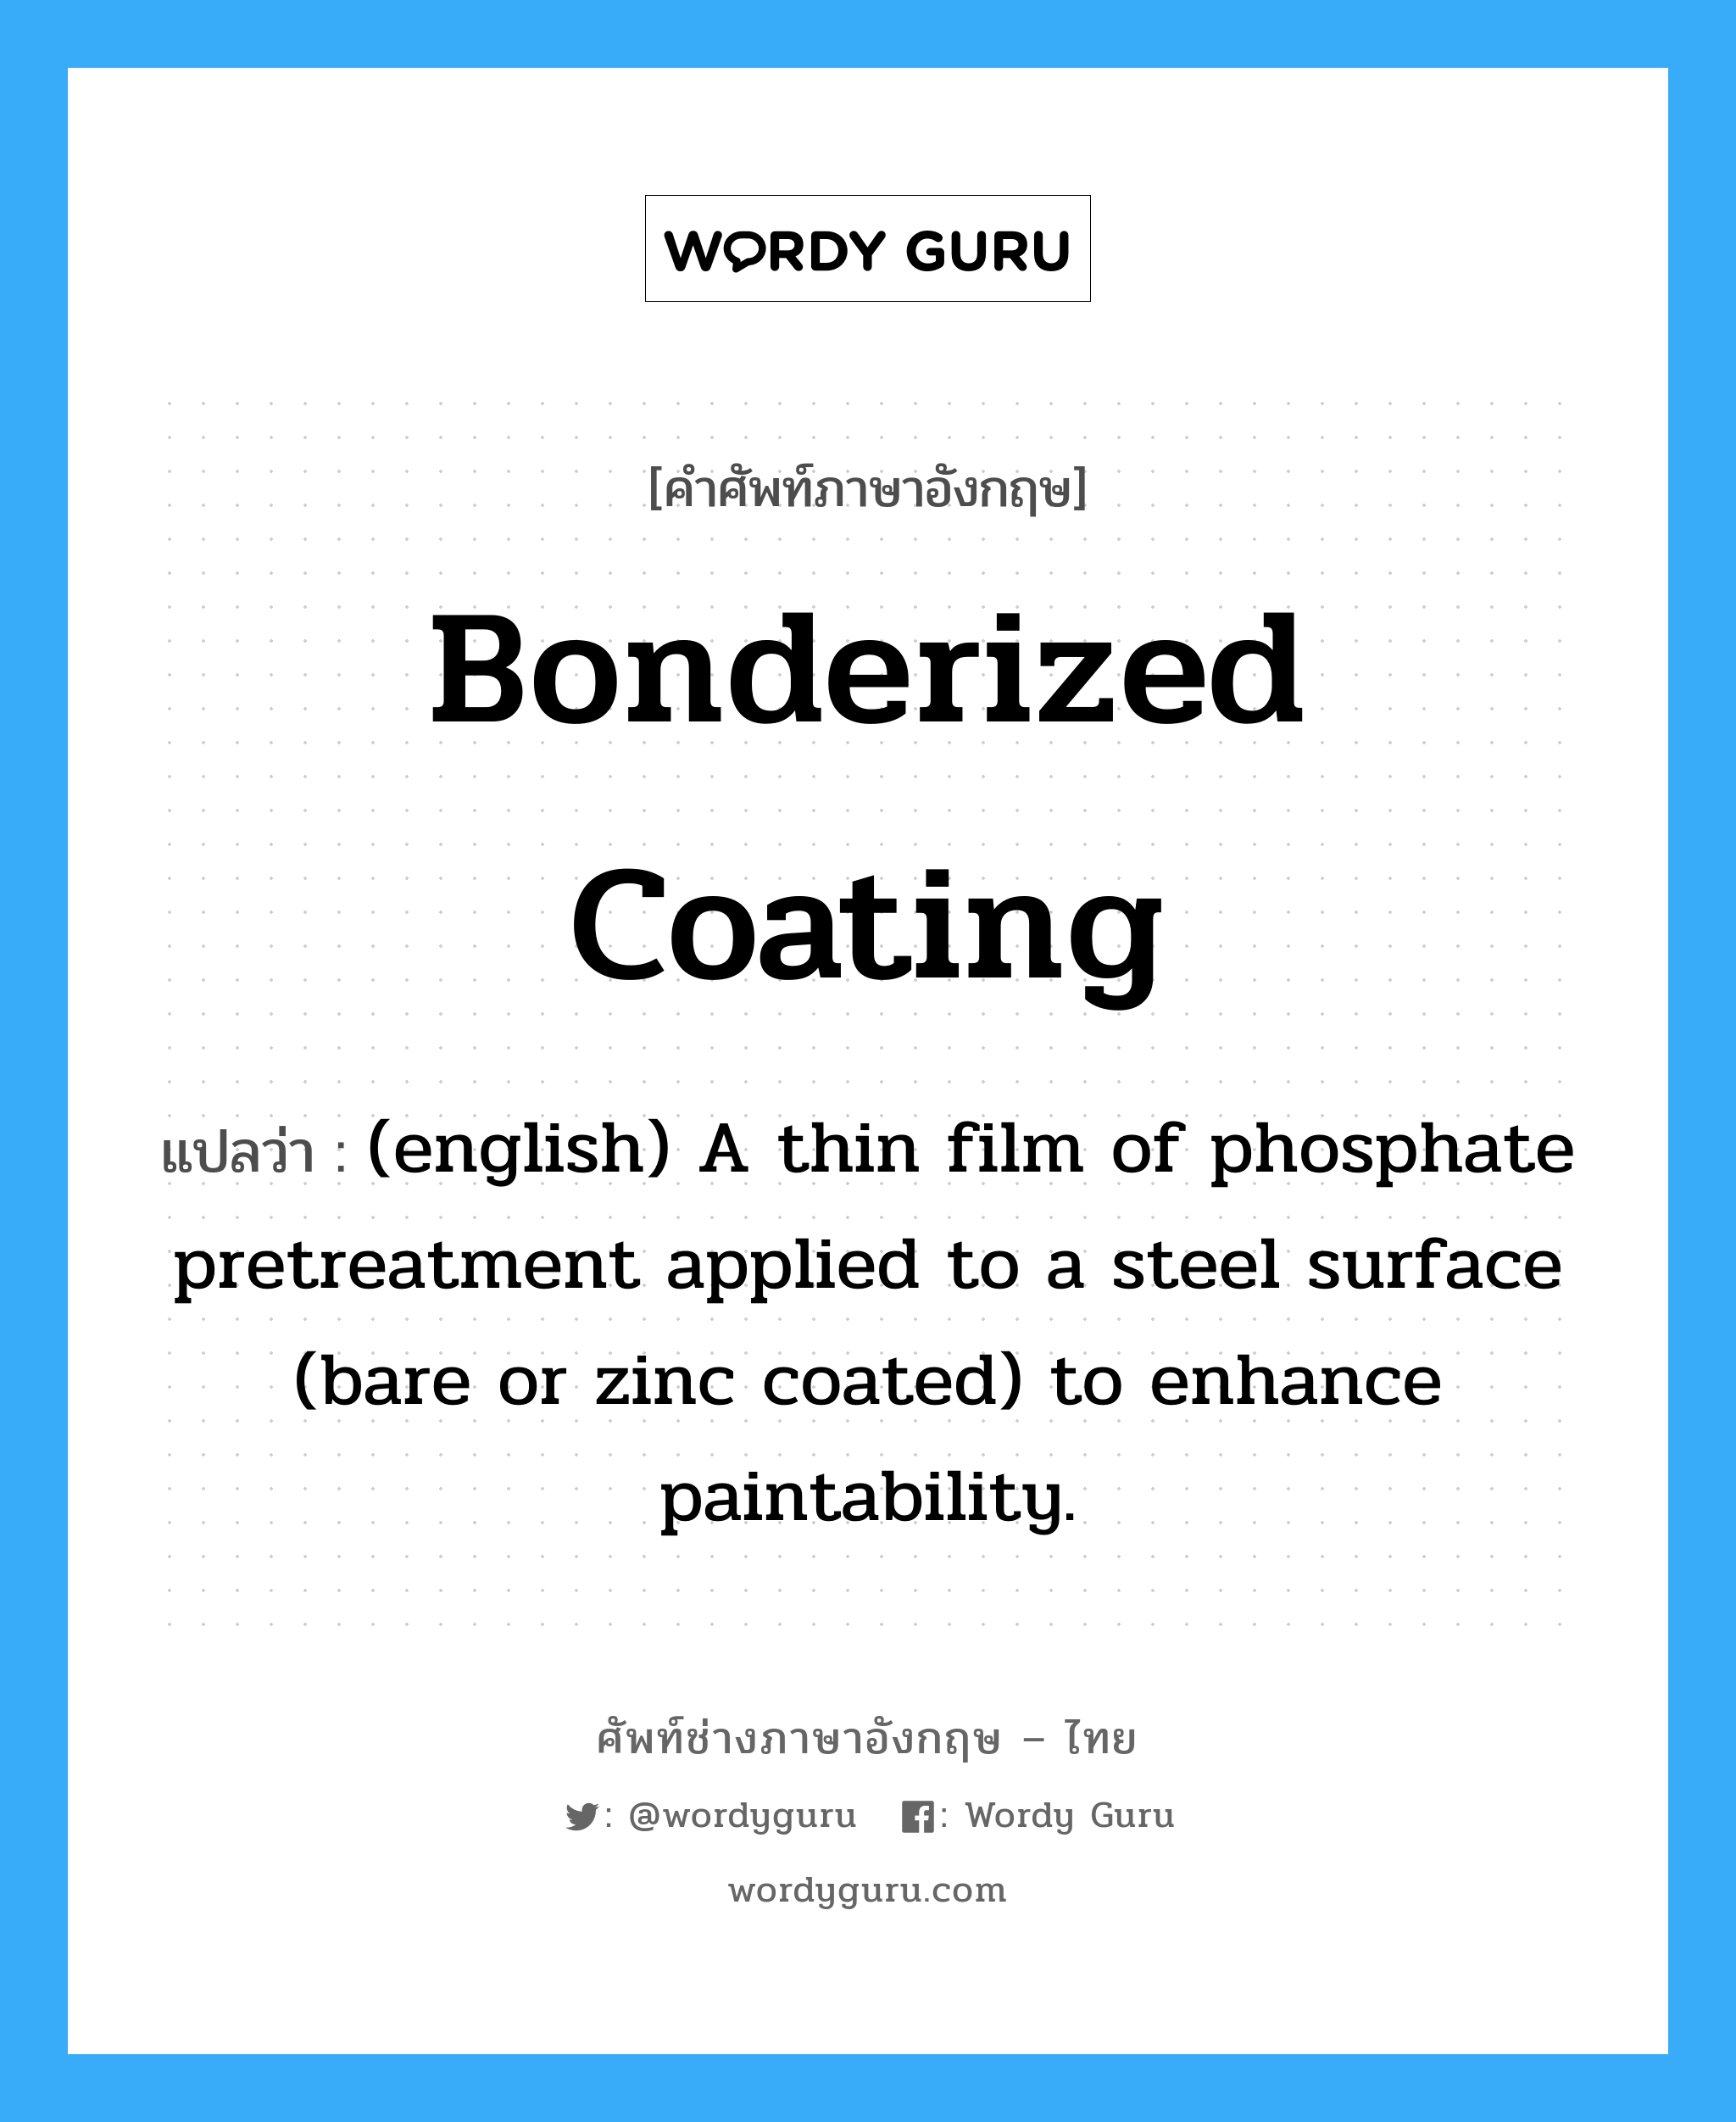 Bonderized Coating แปลว่า?, คำศัพท์ช่างภาษาอังกฤษ - ไทย Bonderized Coating คำศัพท์ภาษาอังกฤษ Bonderized Coating แปลว่า (english) A thin film of phosphate pretreatment applied to a steel surface (bare or zinc coated) to enhance paintability.